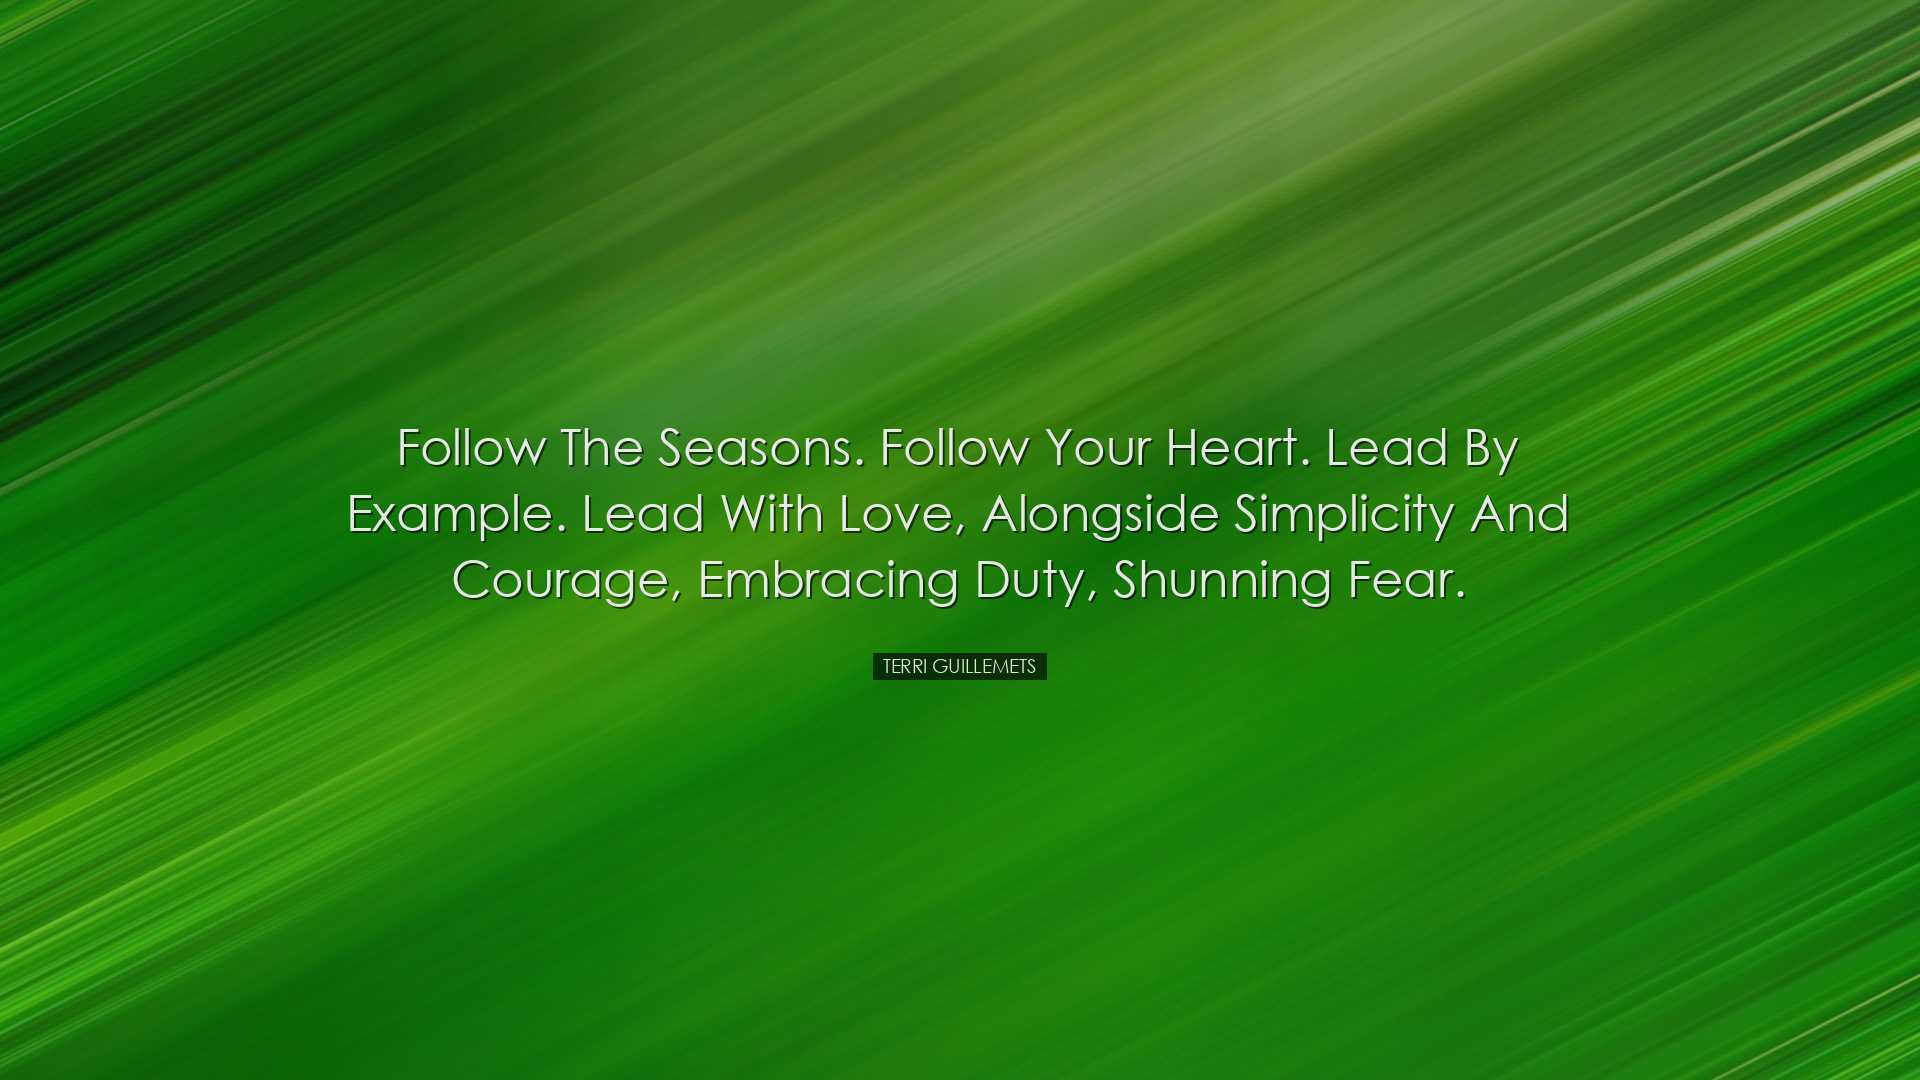 Follow the seasons. Follow your heart. Lead by example. Lead with